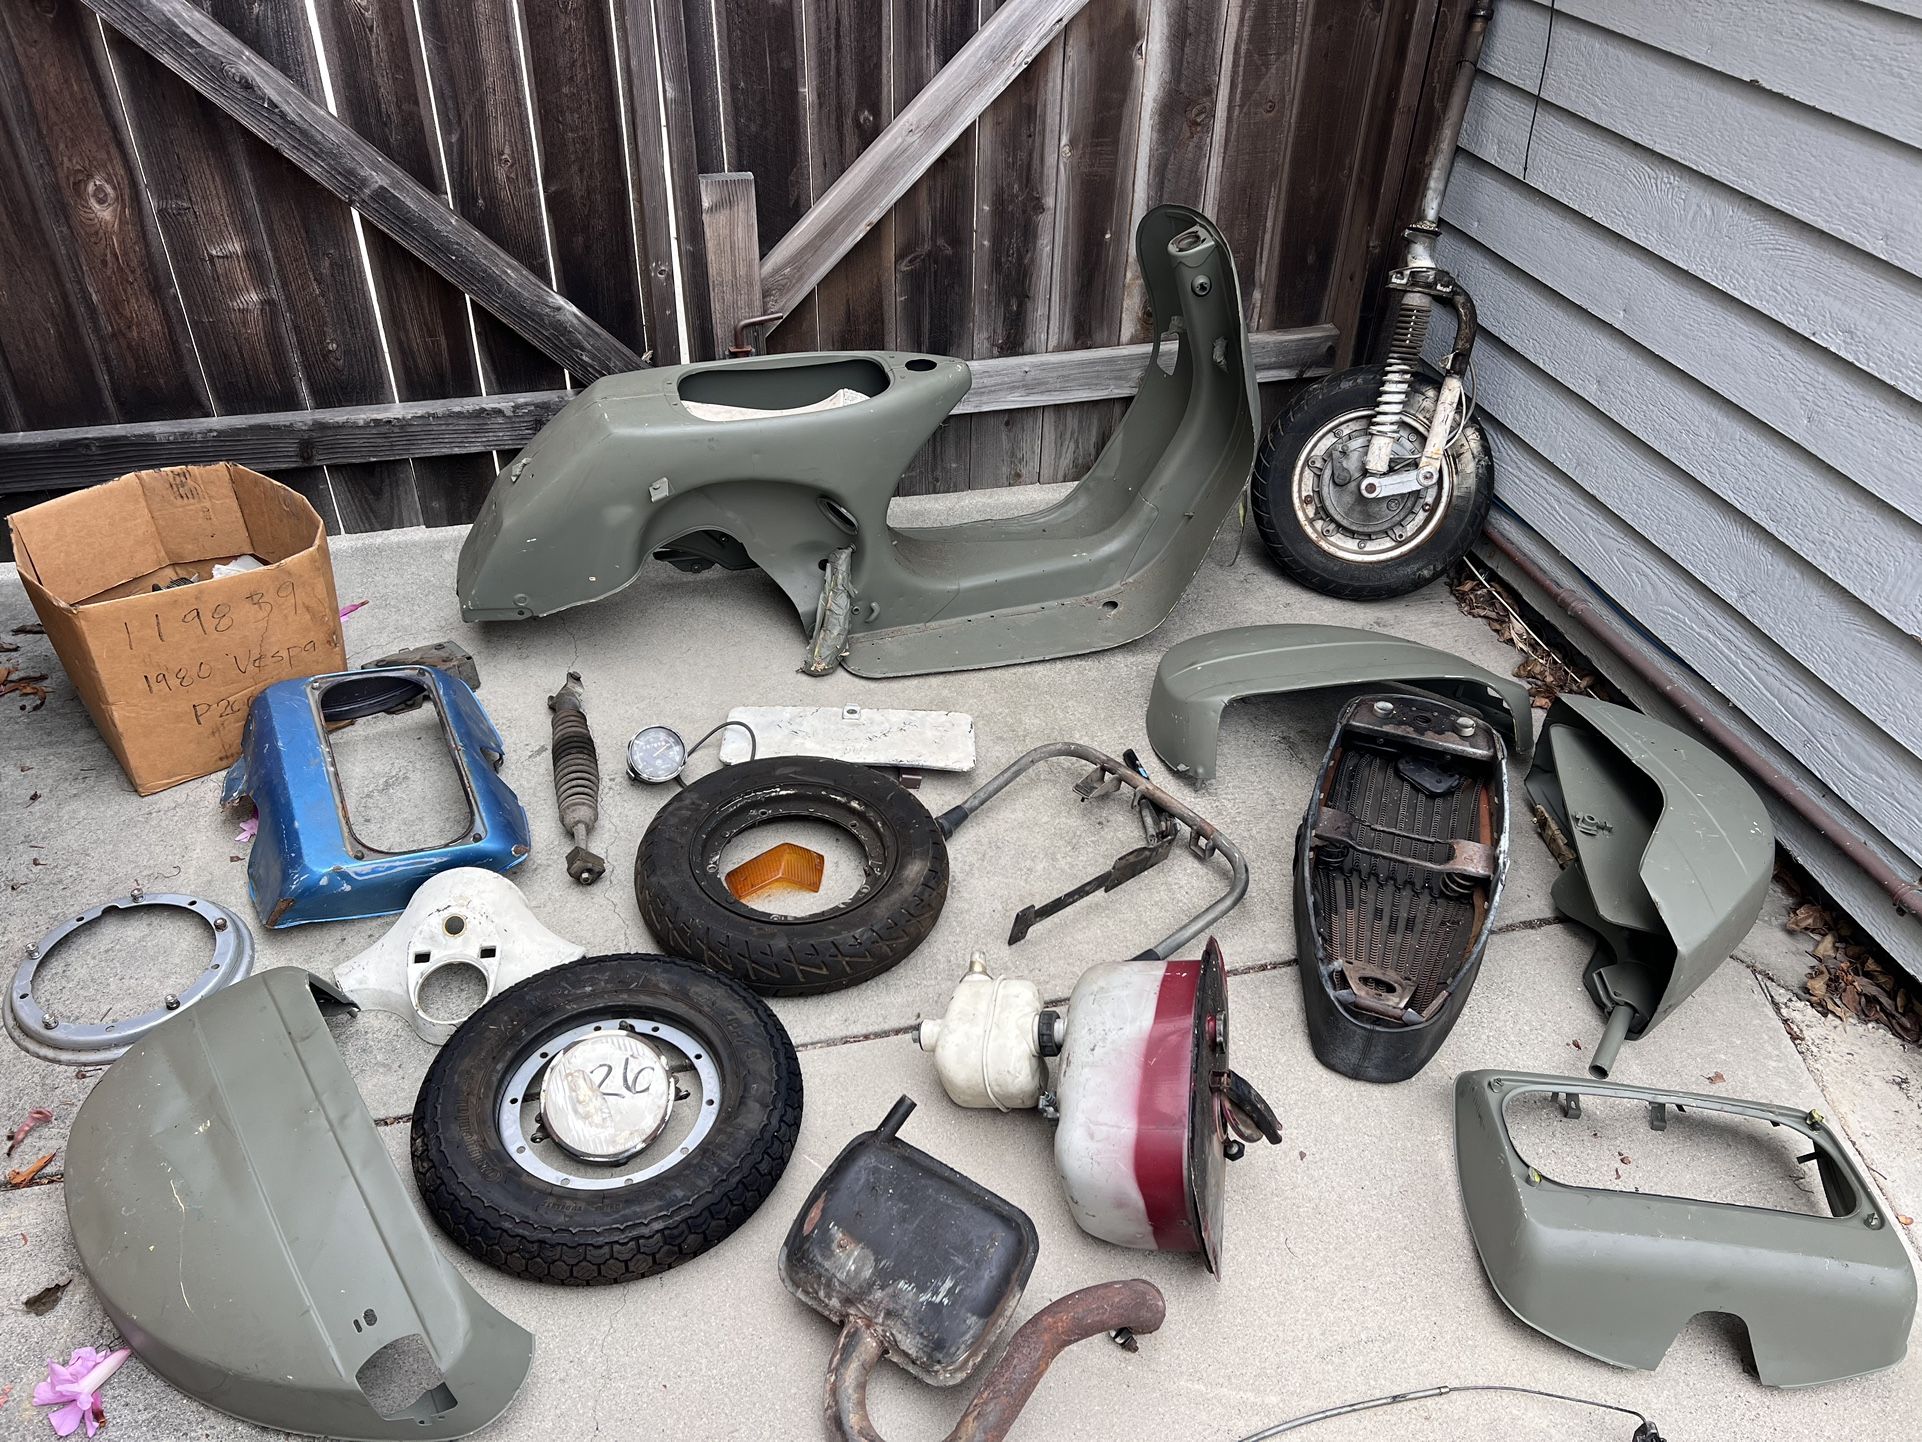 FREE 1980 Vespa Scooter In Pieces Barn Find 200e Parts For eBay Or Put It All Together I Don’t Know If Complete Besides Motor Must Take All